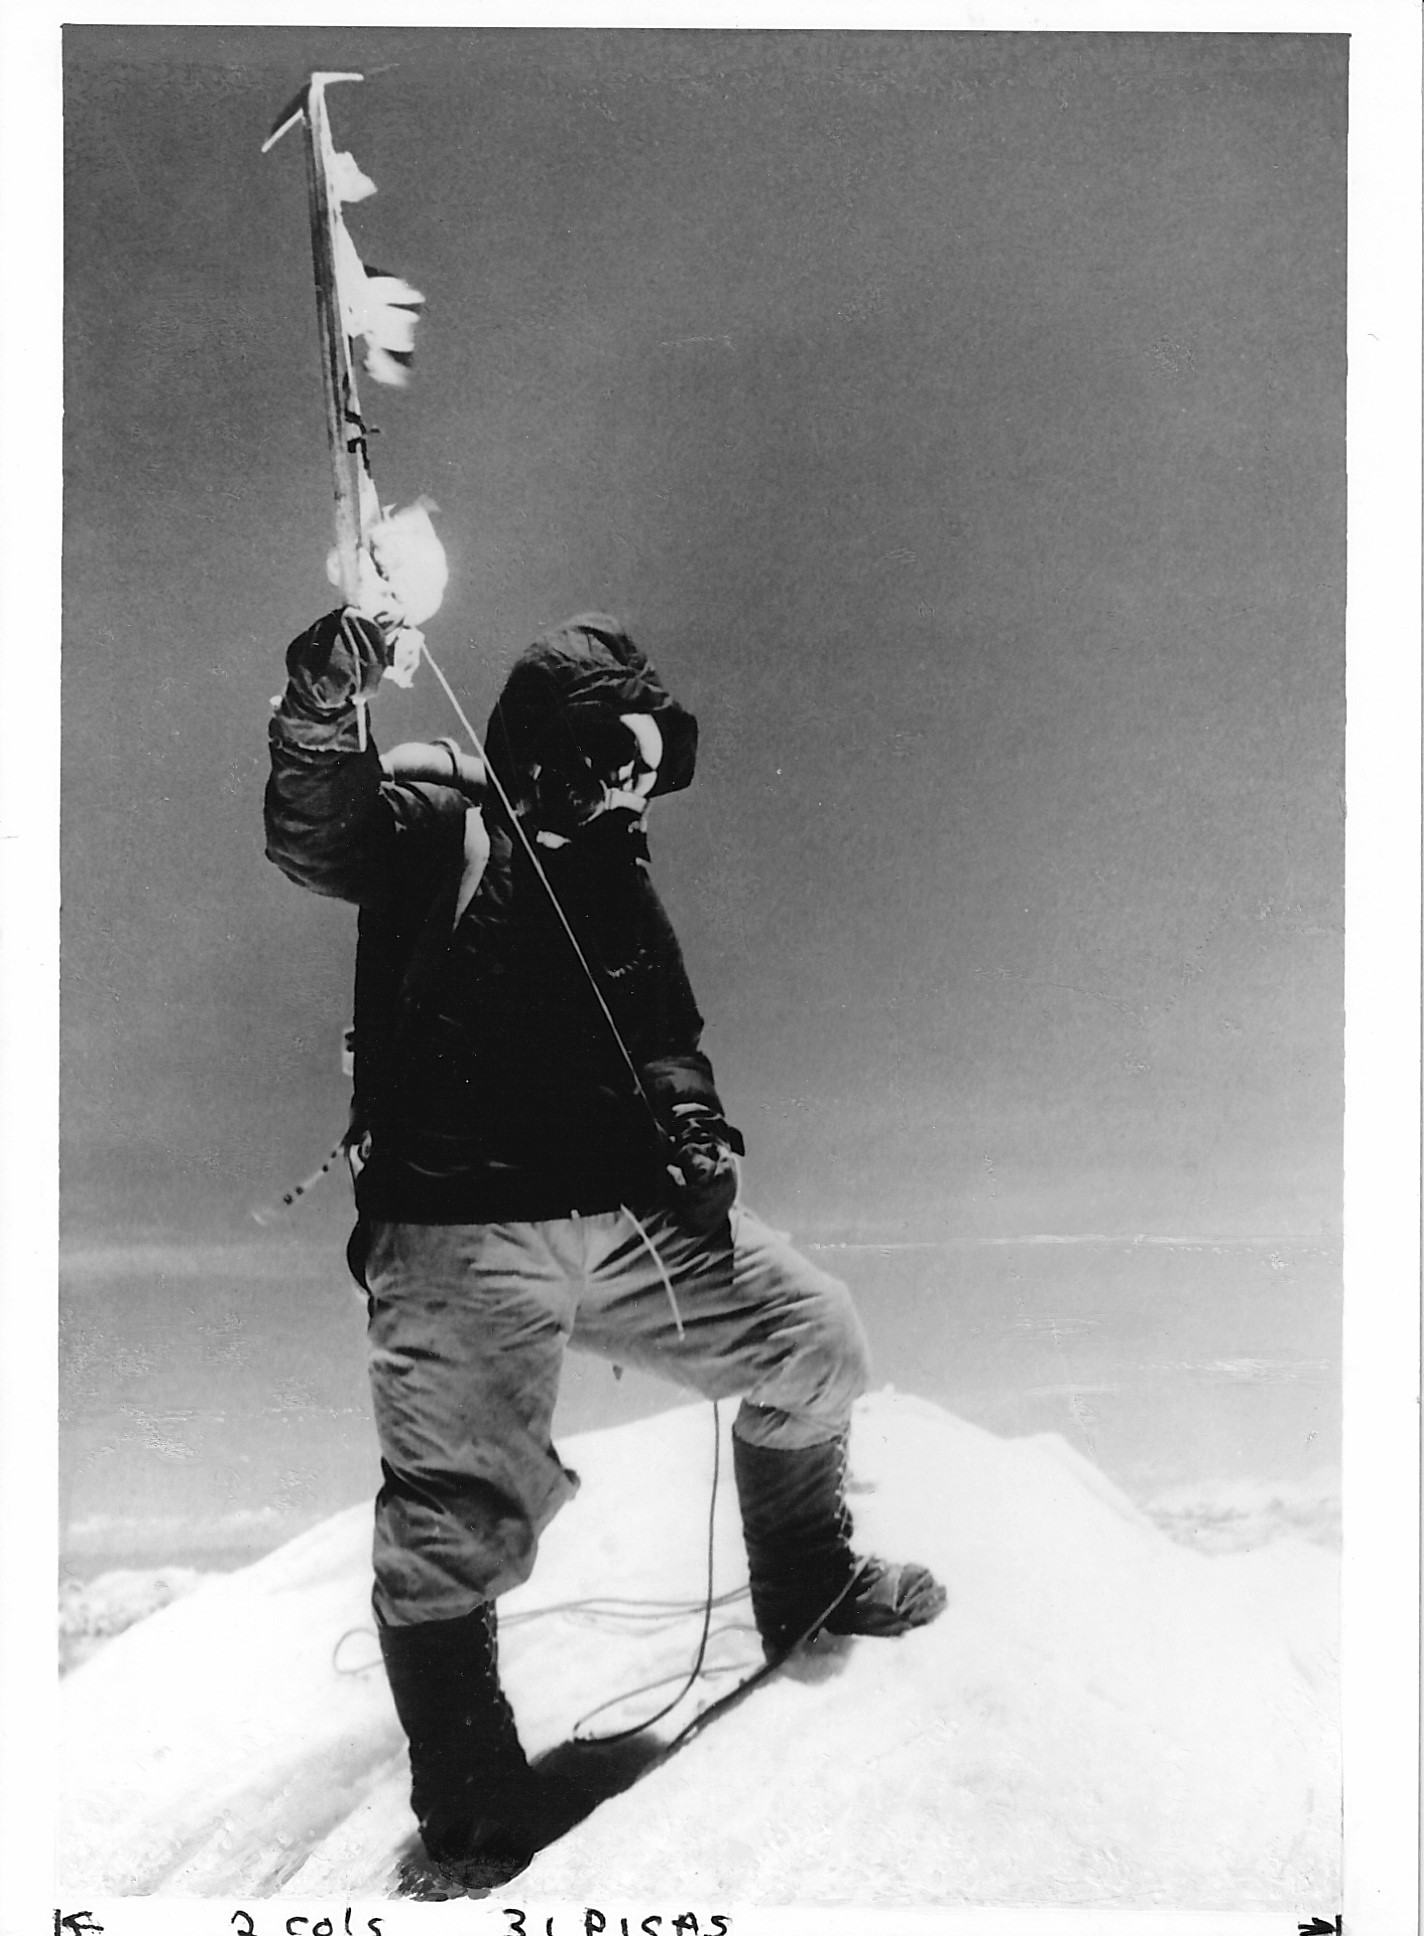 A photo of Tenzing Norgay taken by Edmund Hillary on the summit of Mount Everest